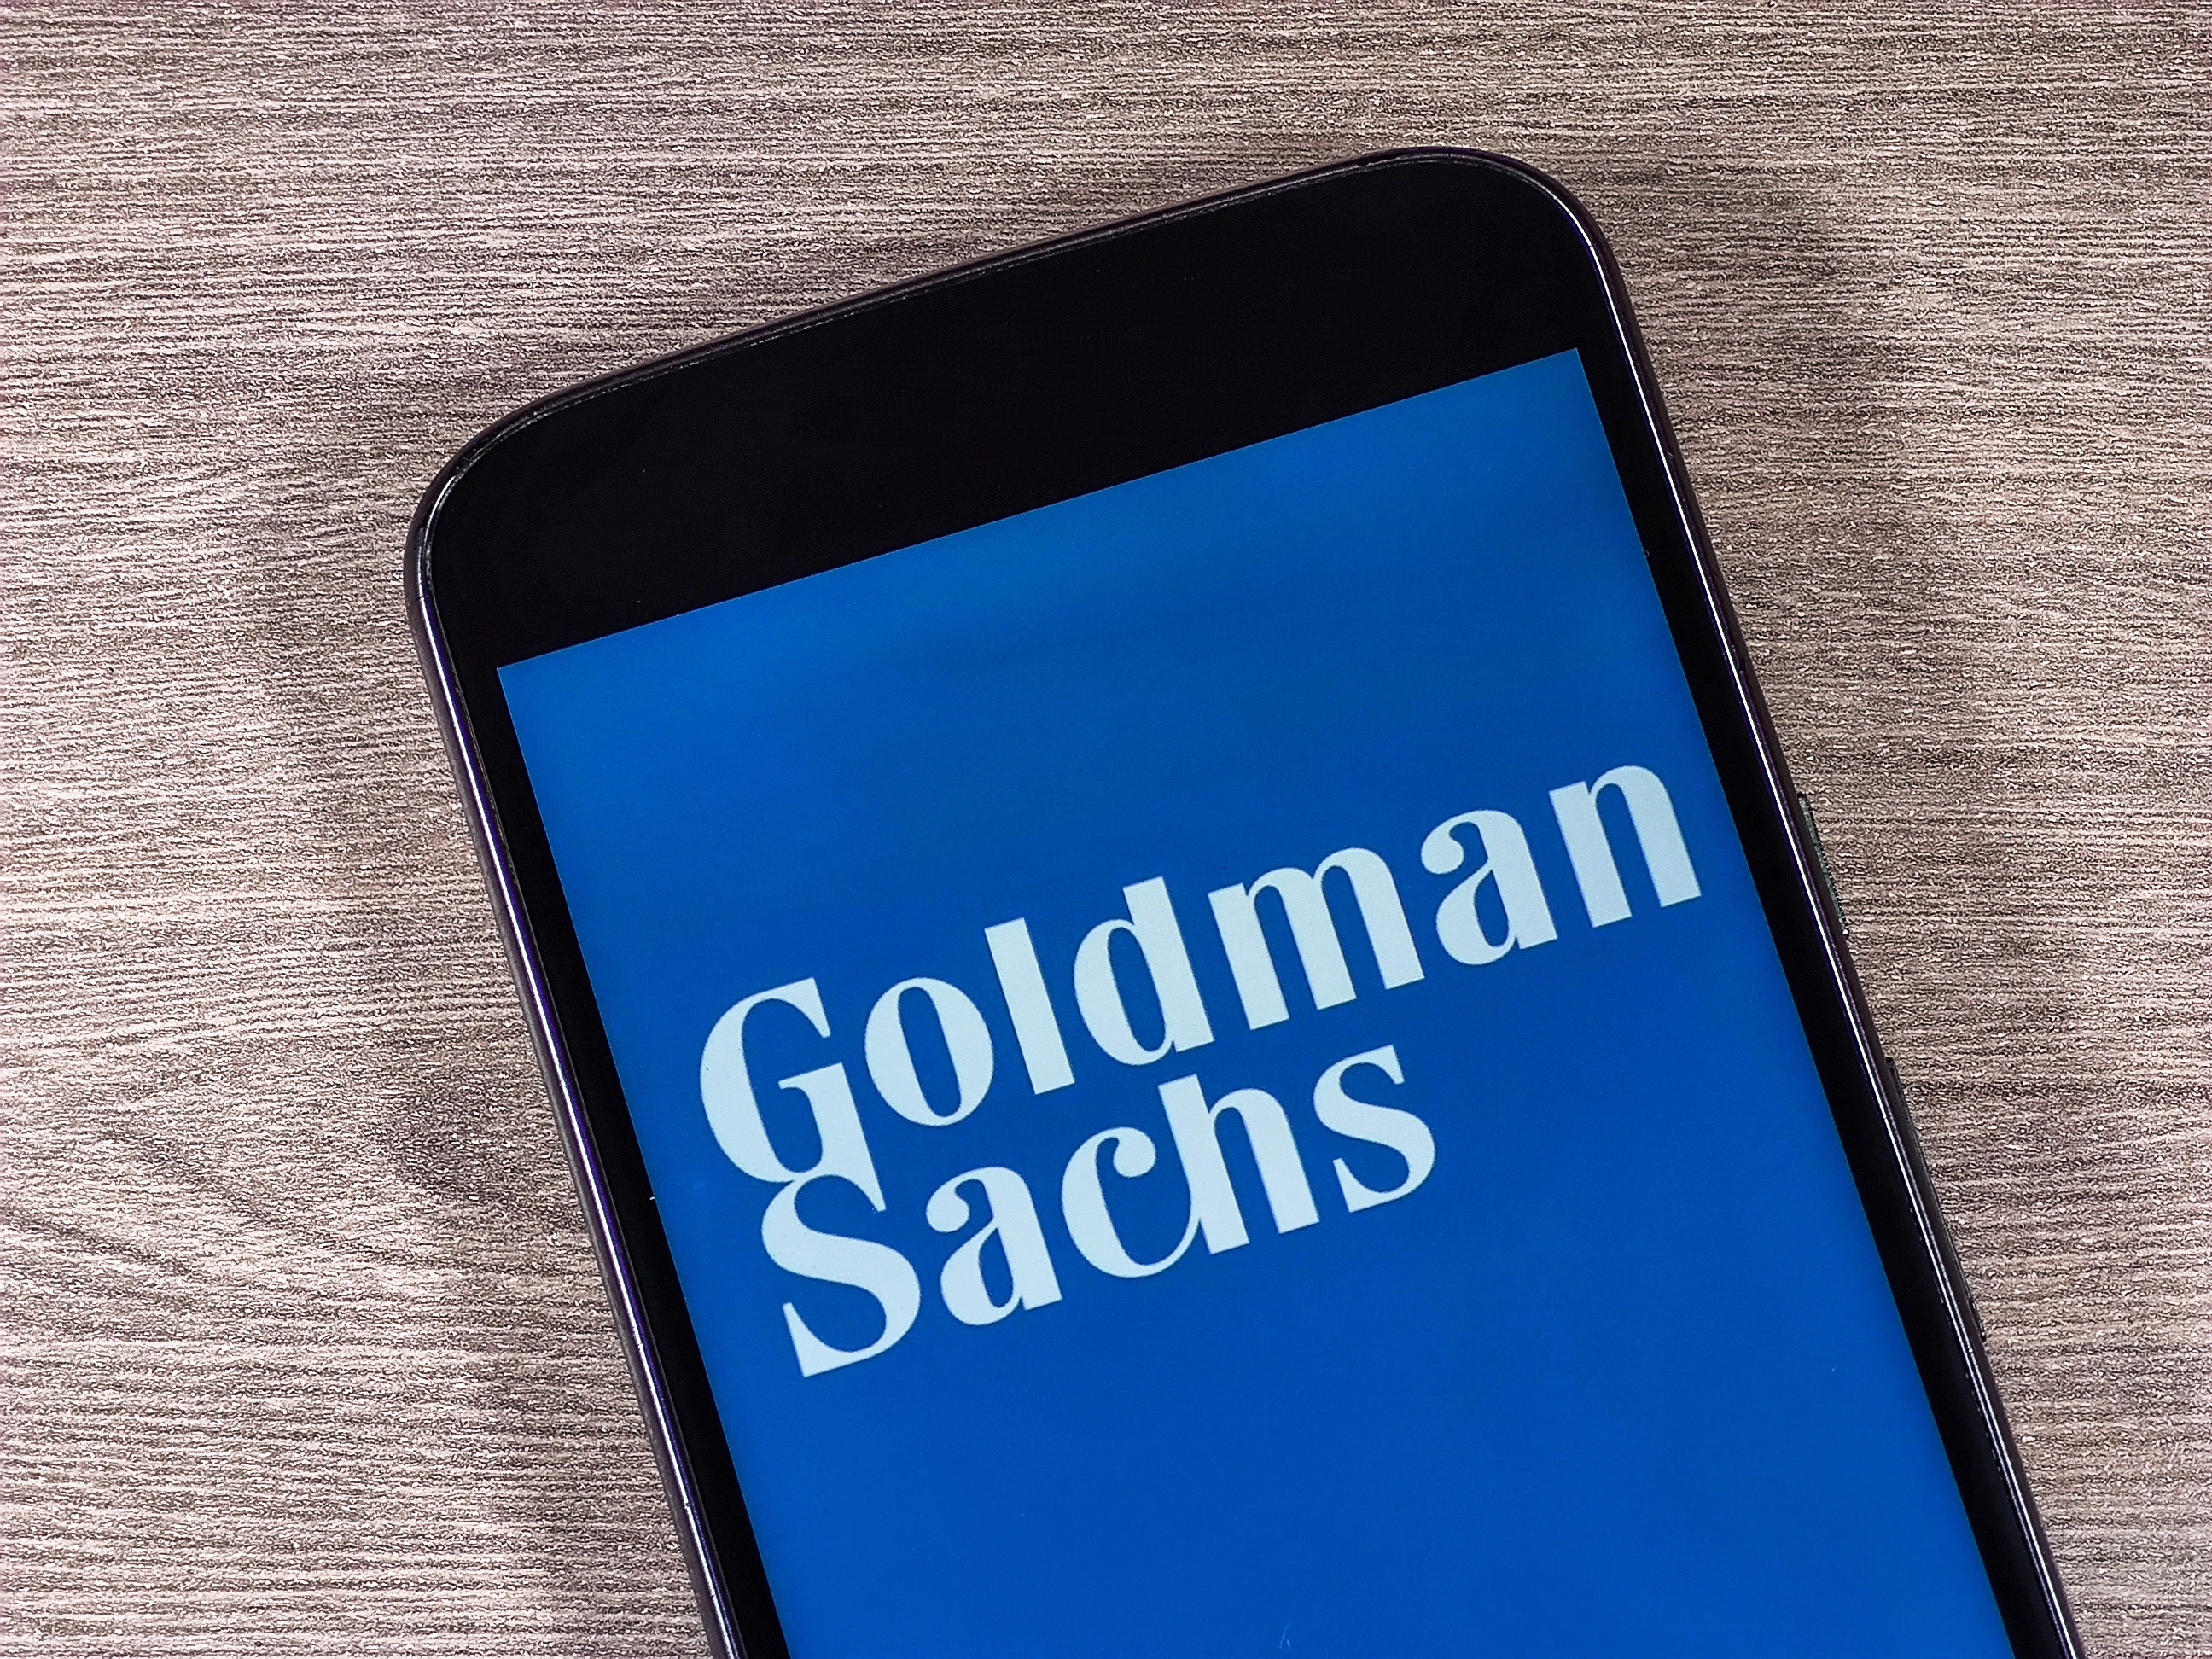 Logo of the Goldman Sachs Group in screen the smartphone